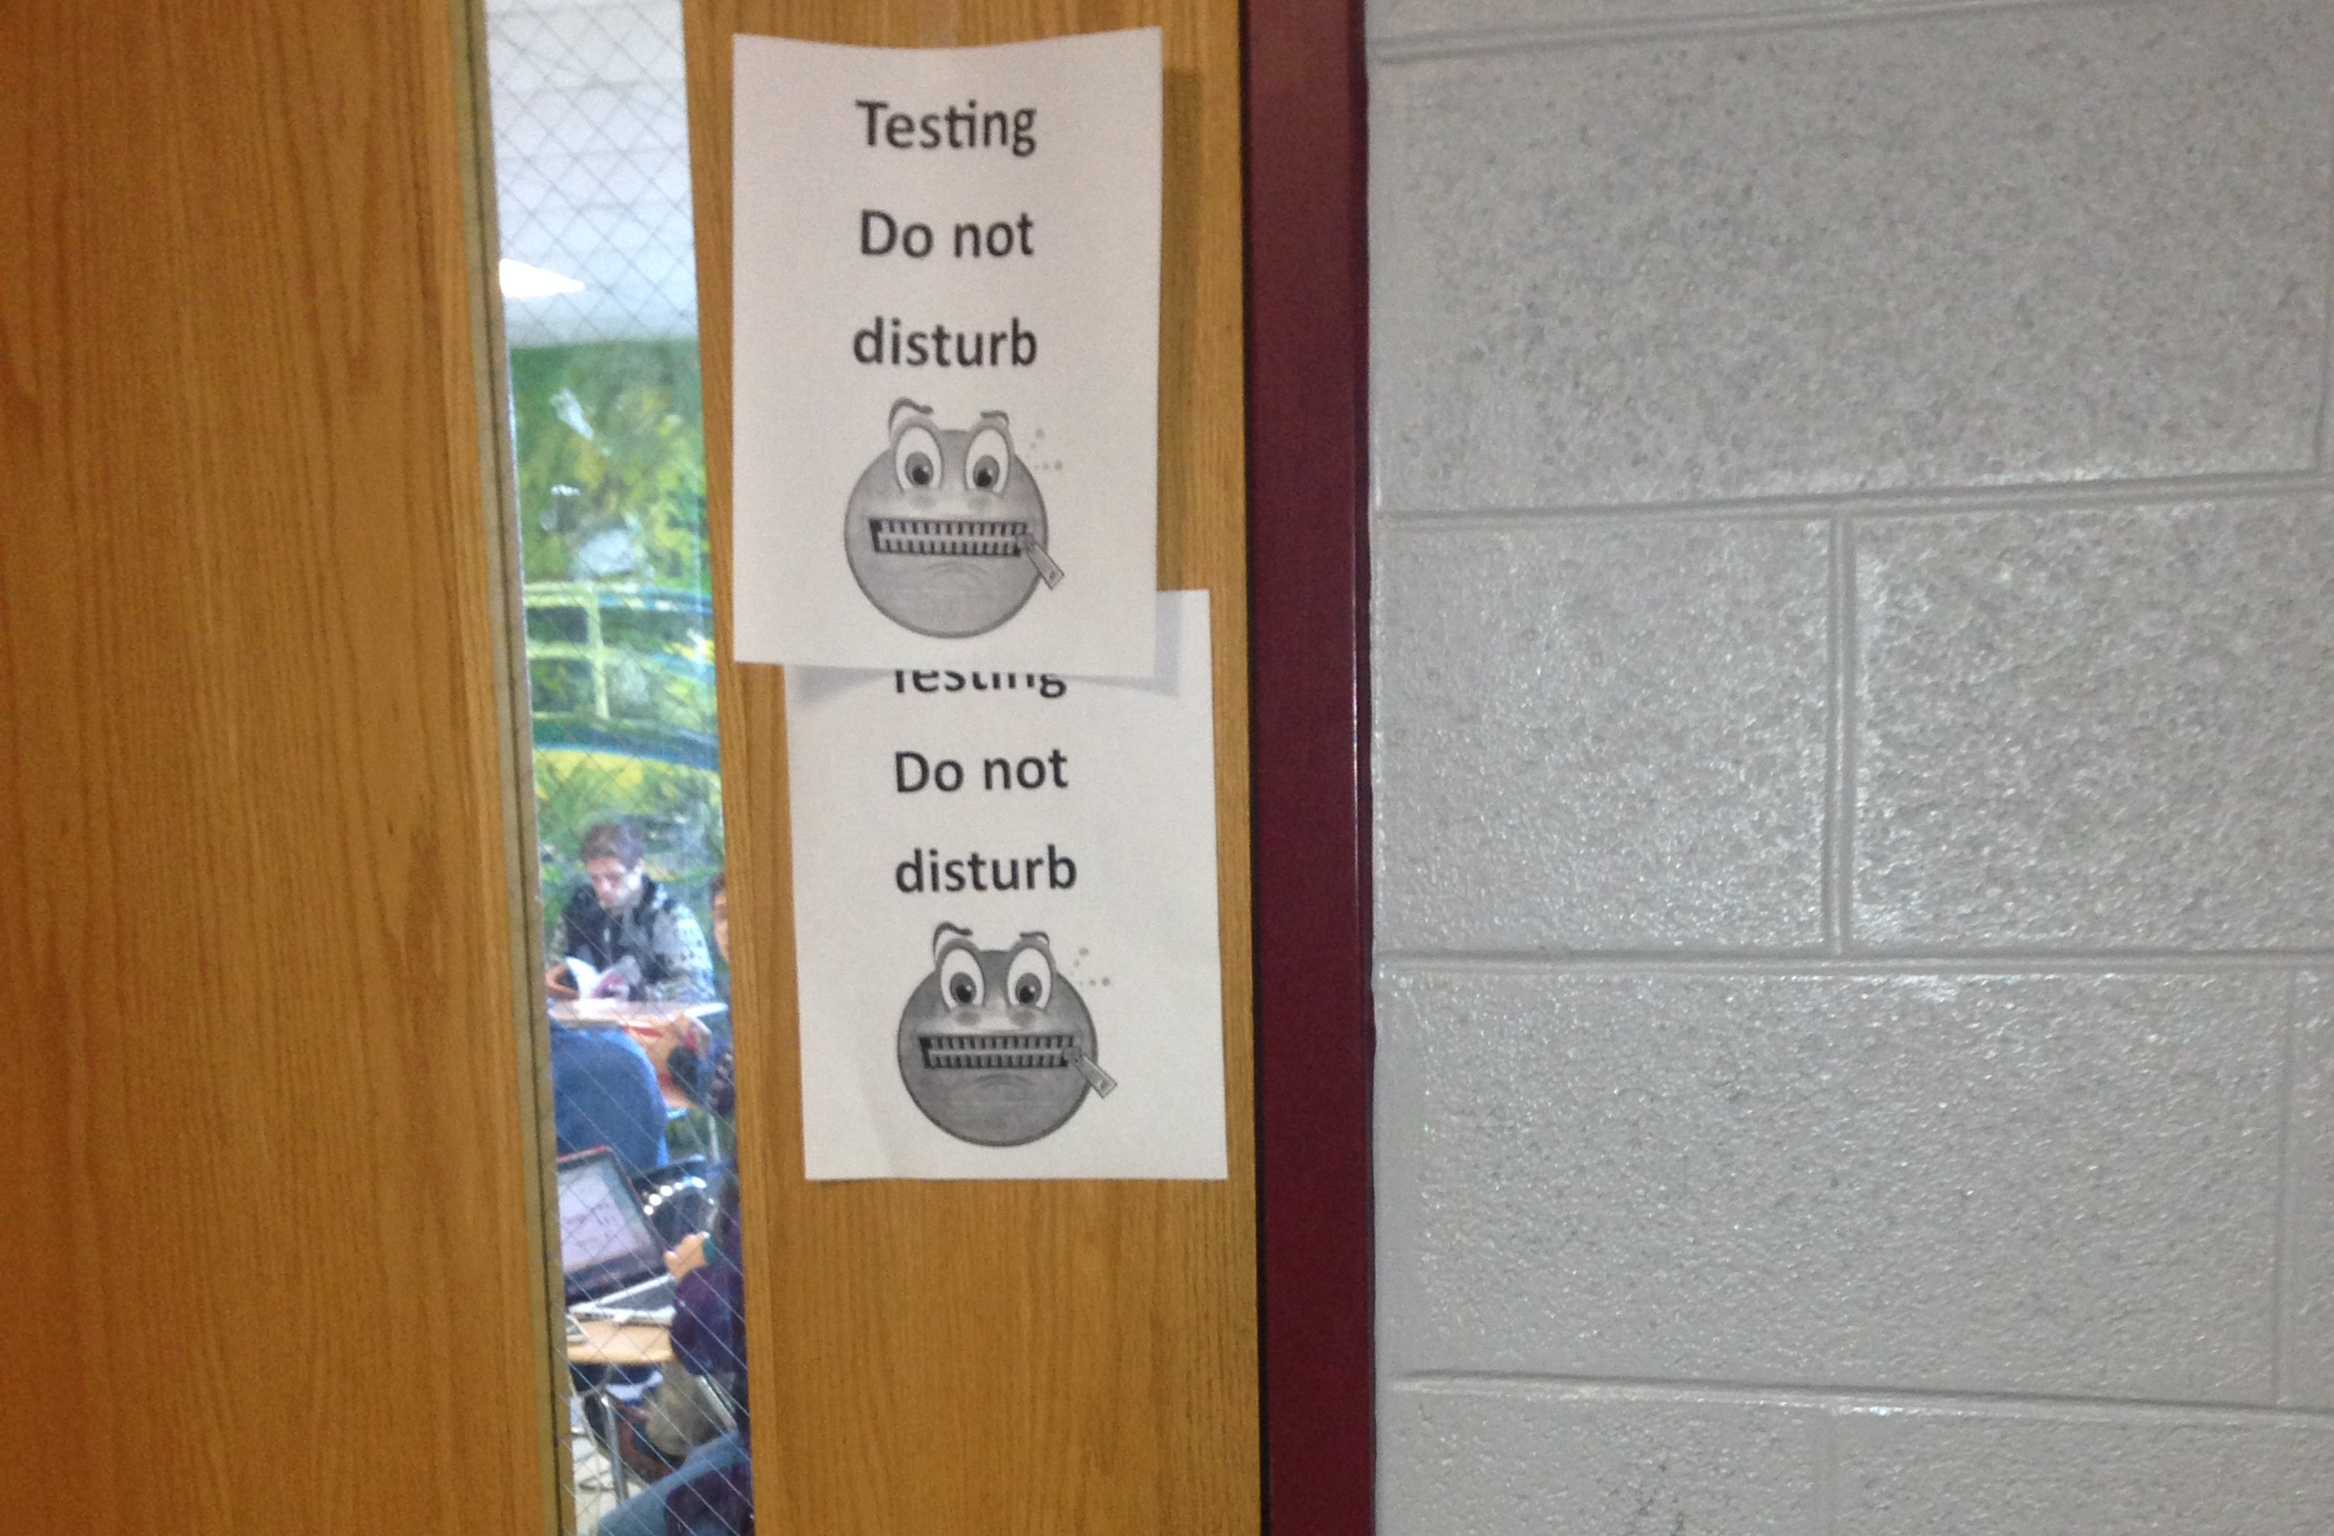 TN Ready testing requires staff, students to adjust – The Bark